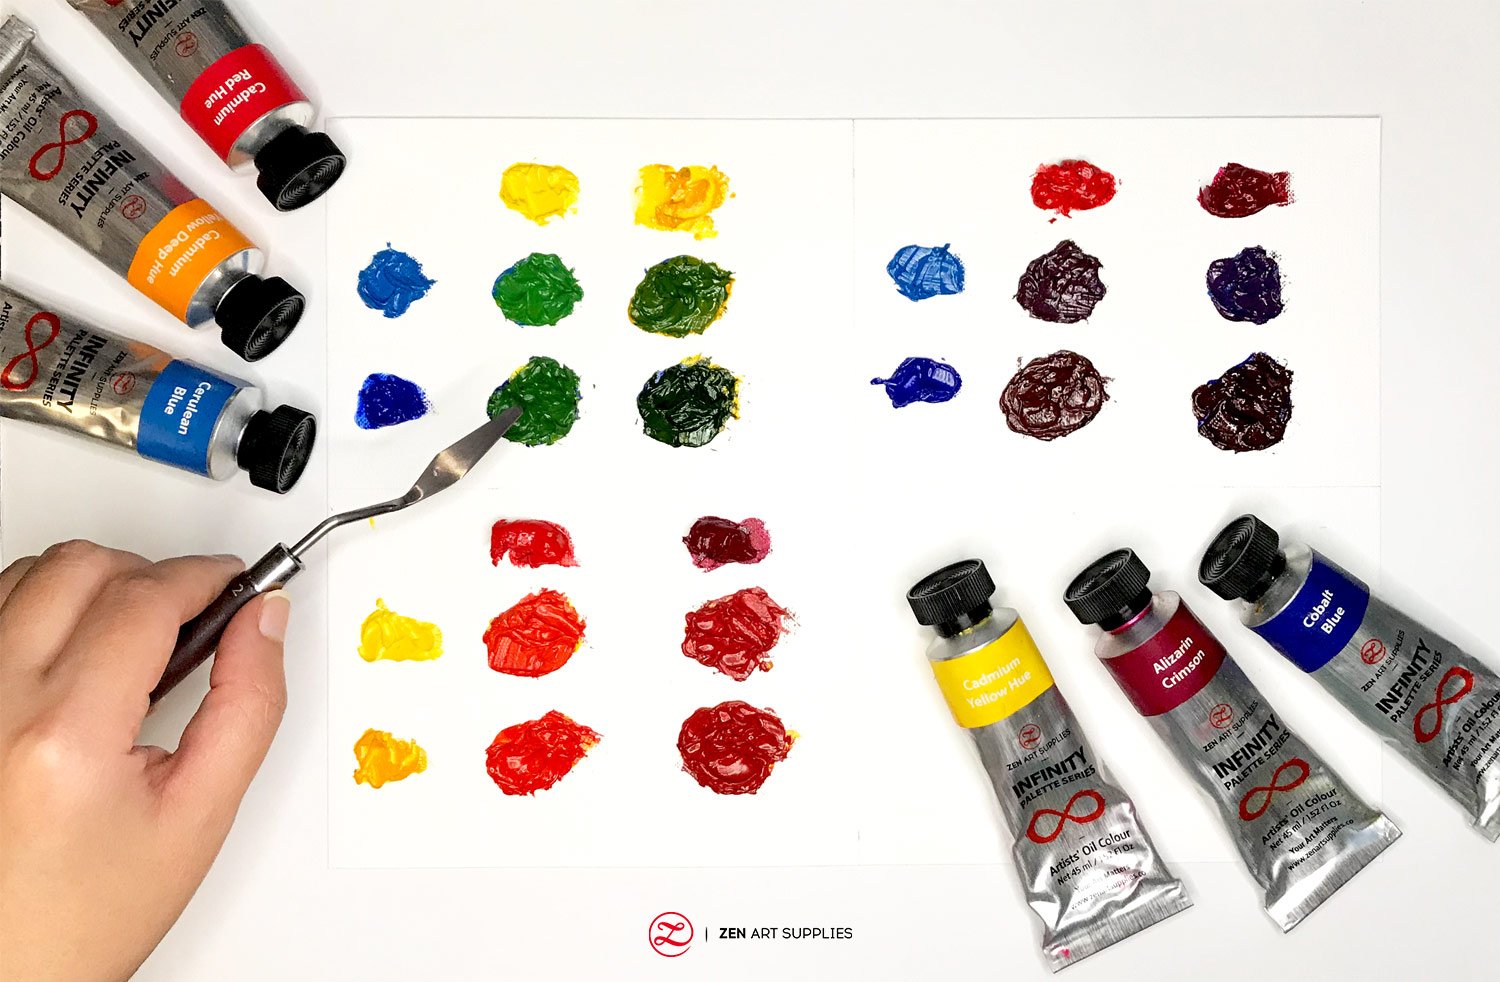 How to Choose a Basic Colour Palette for Acrylic Painting